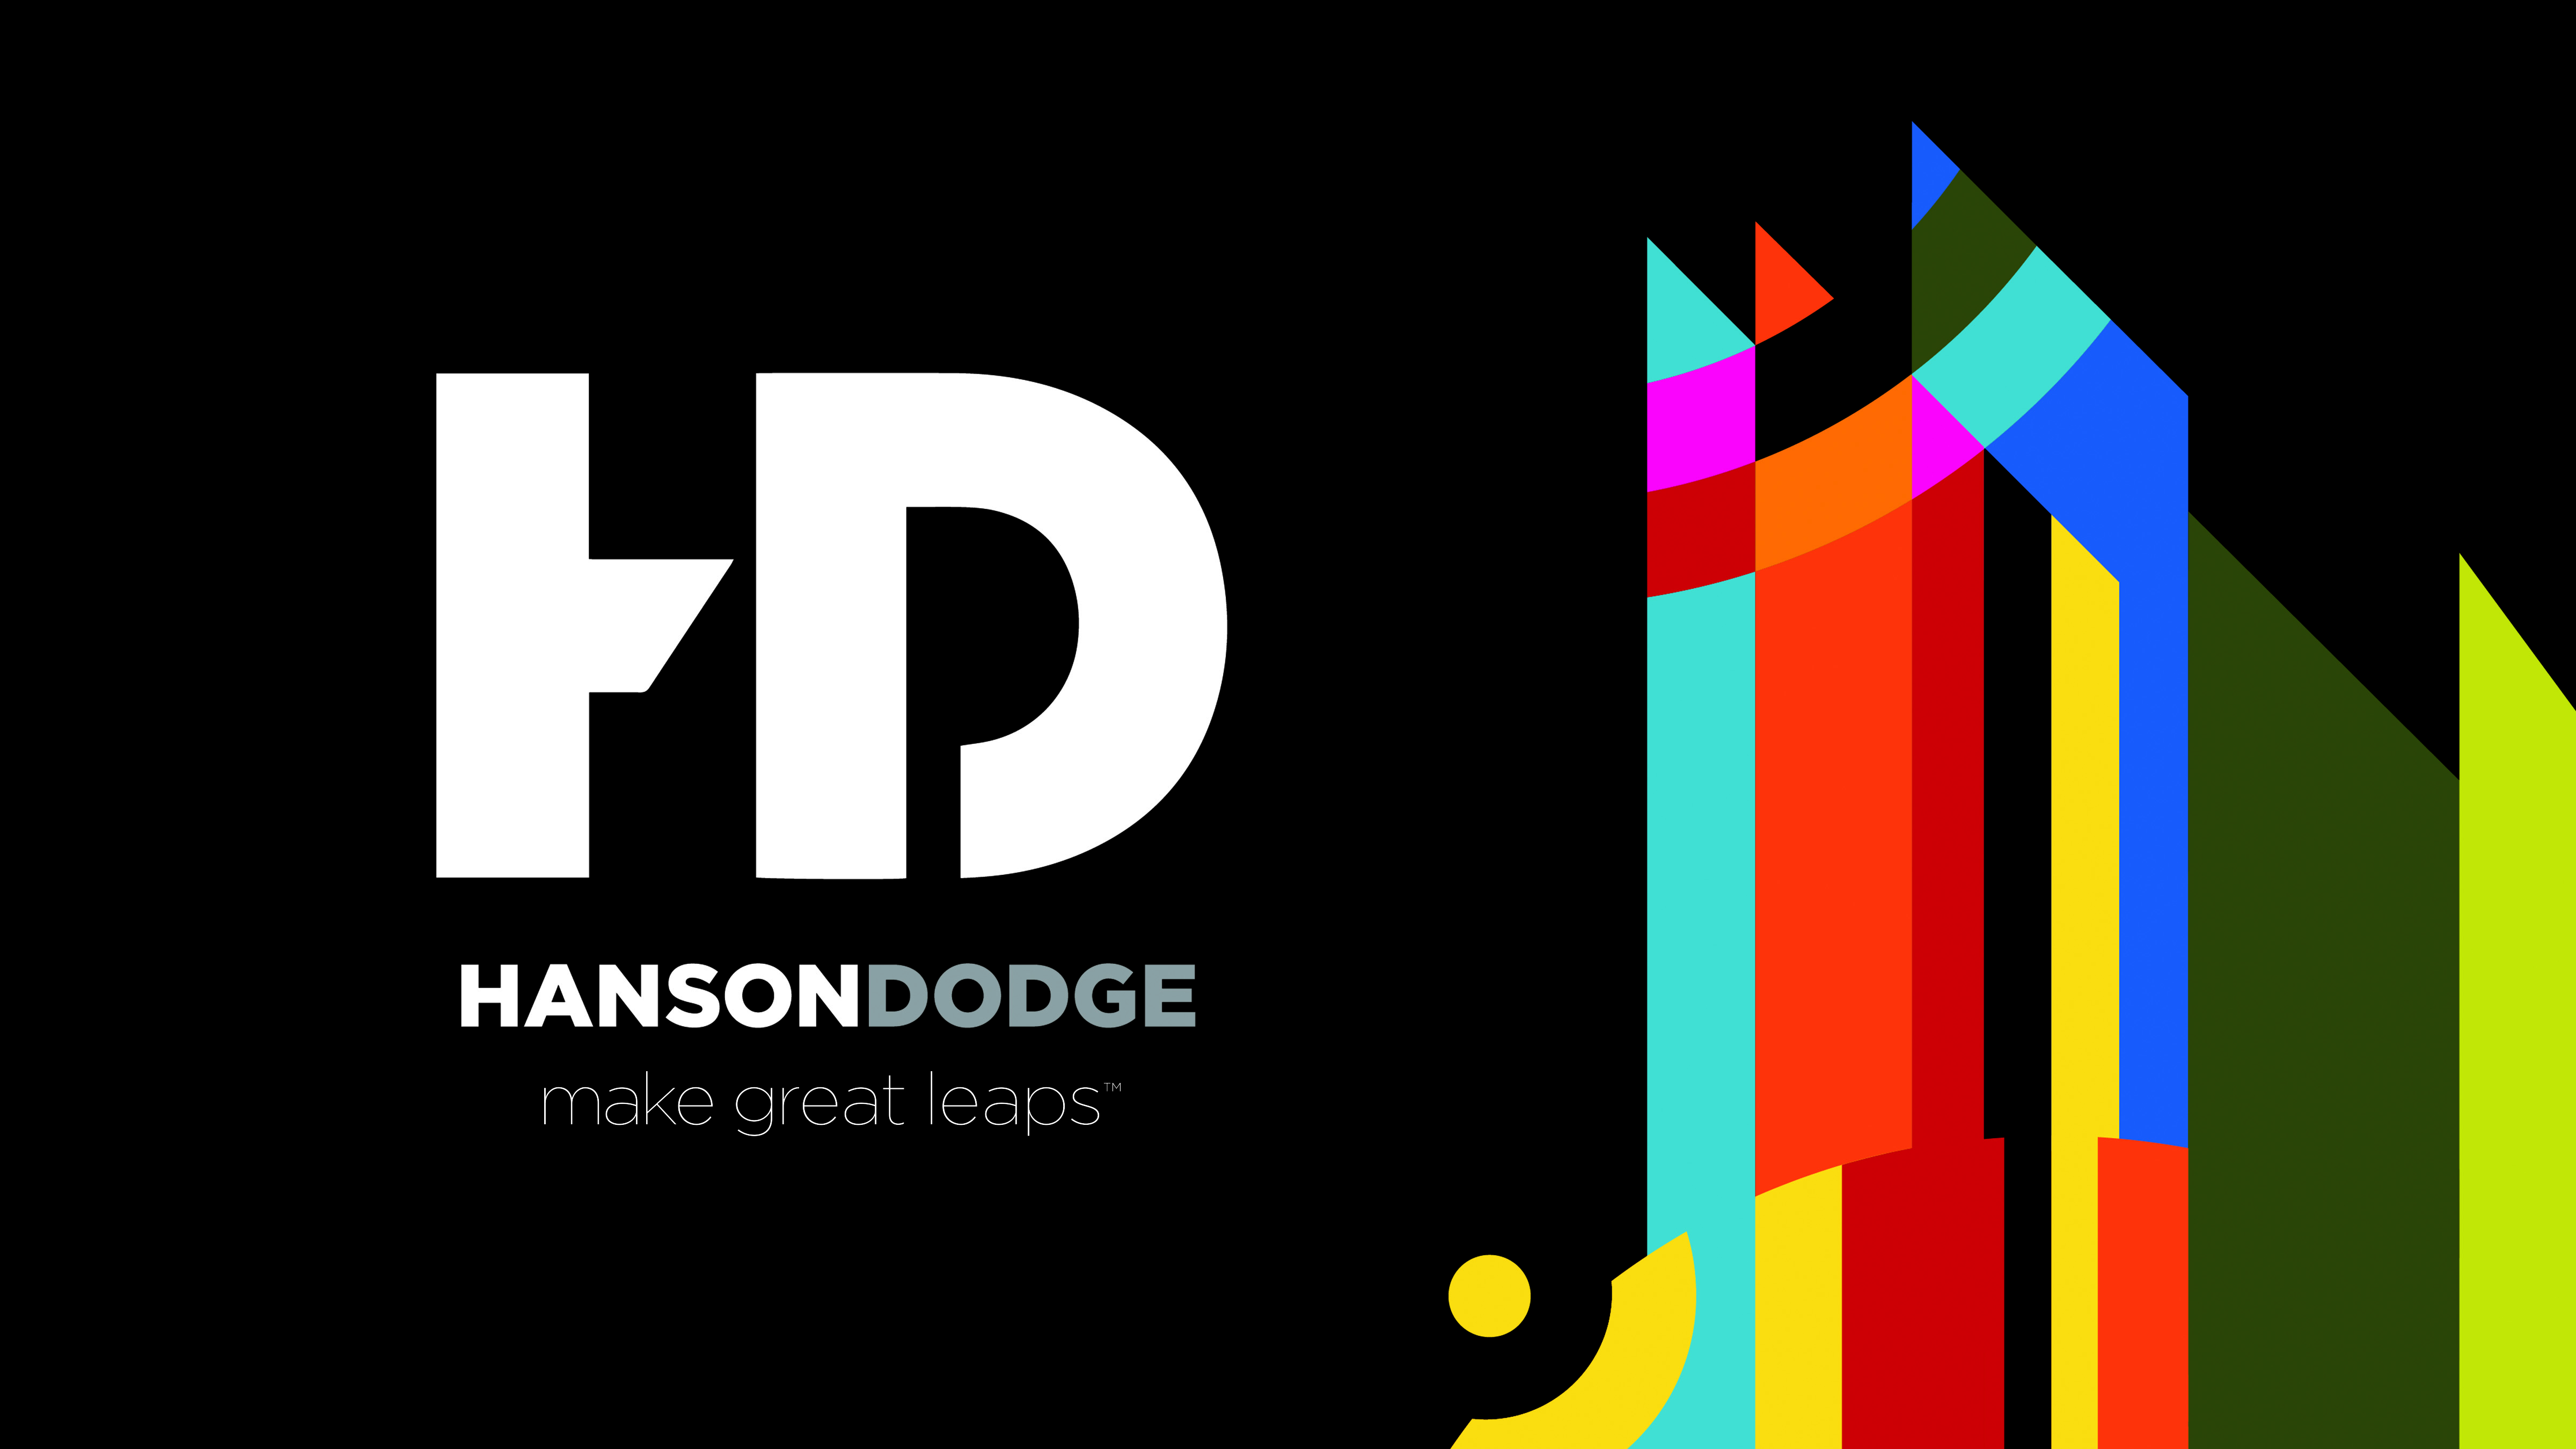 Off to a Fast Start: Hanson Dodge Picks Up Four New Business Wins In First Four Months